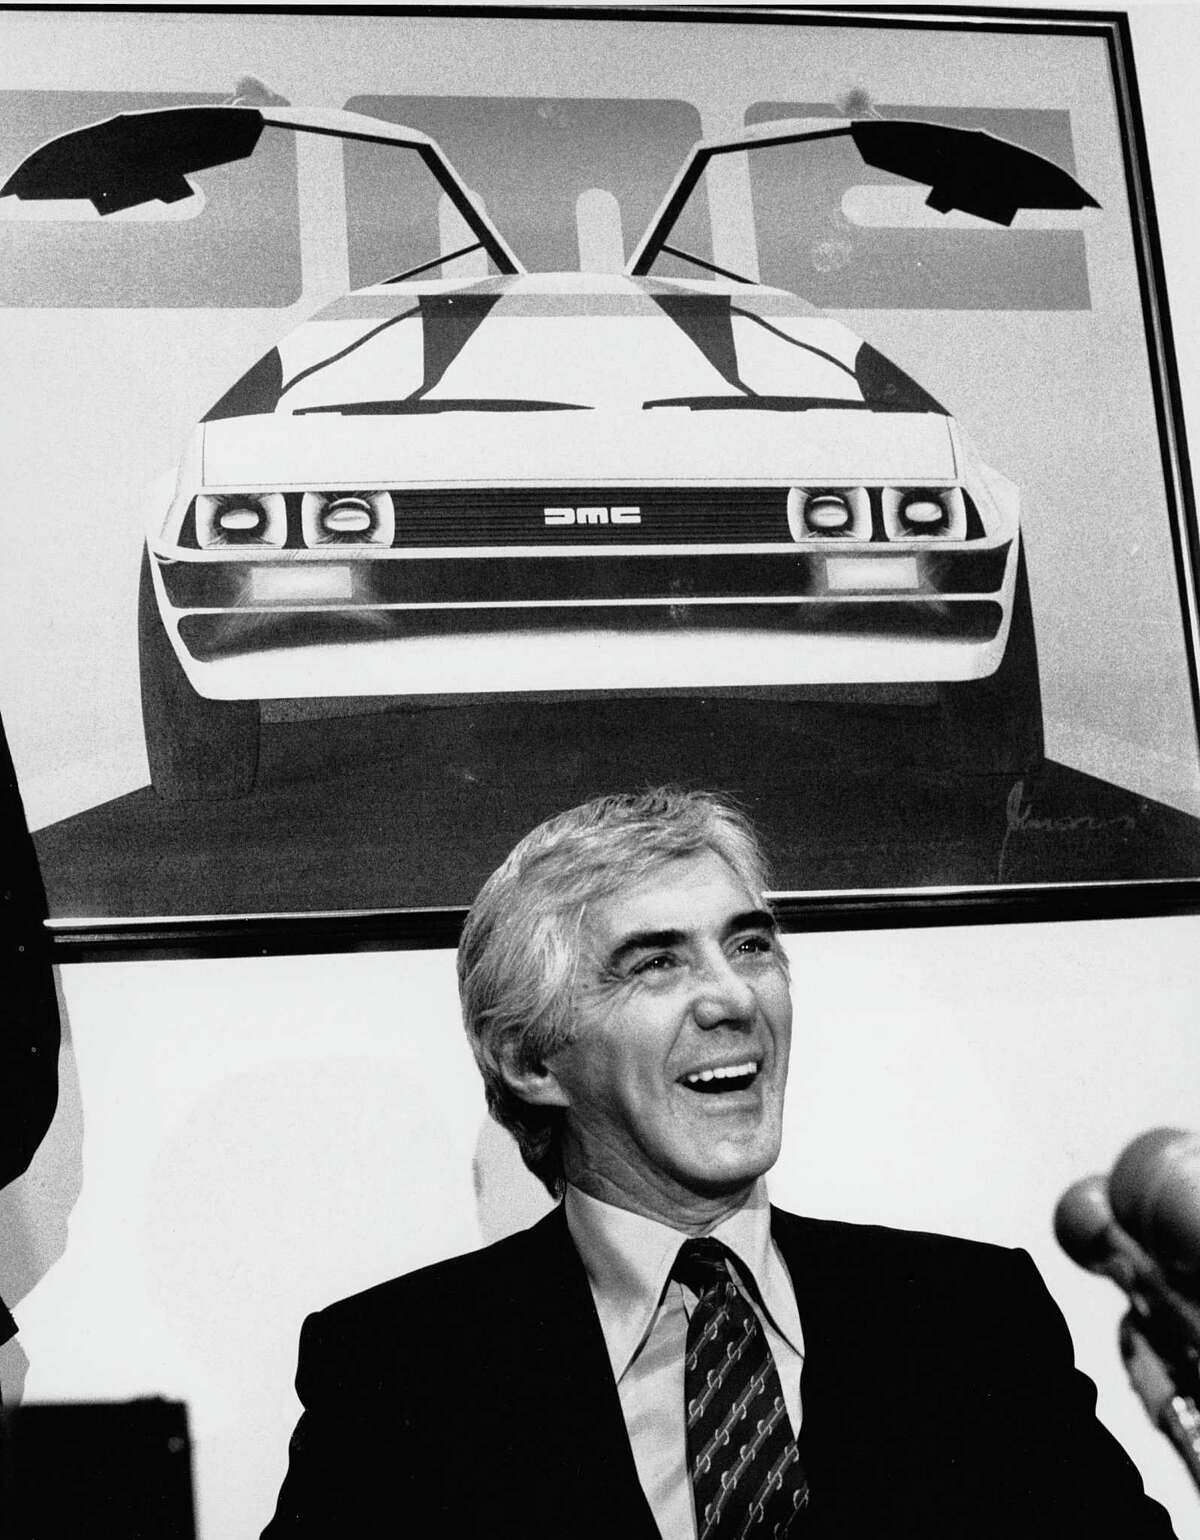 John DeLorean, seen in 1982, died in 2005. Now San Antonio-based DeLorean Motors Reimagined and the DeLorean Legacy Project, run by his daughter, are squaring off over his legacy.